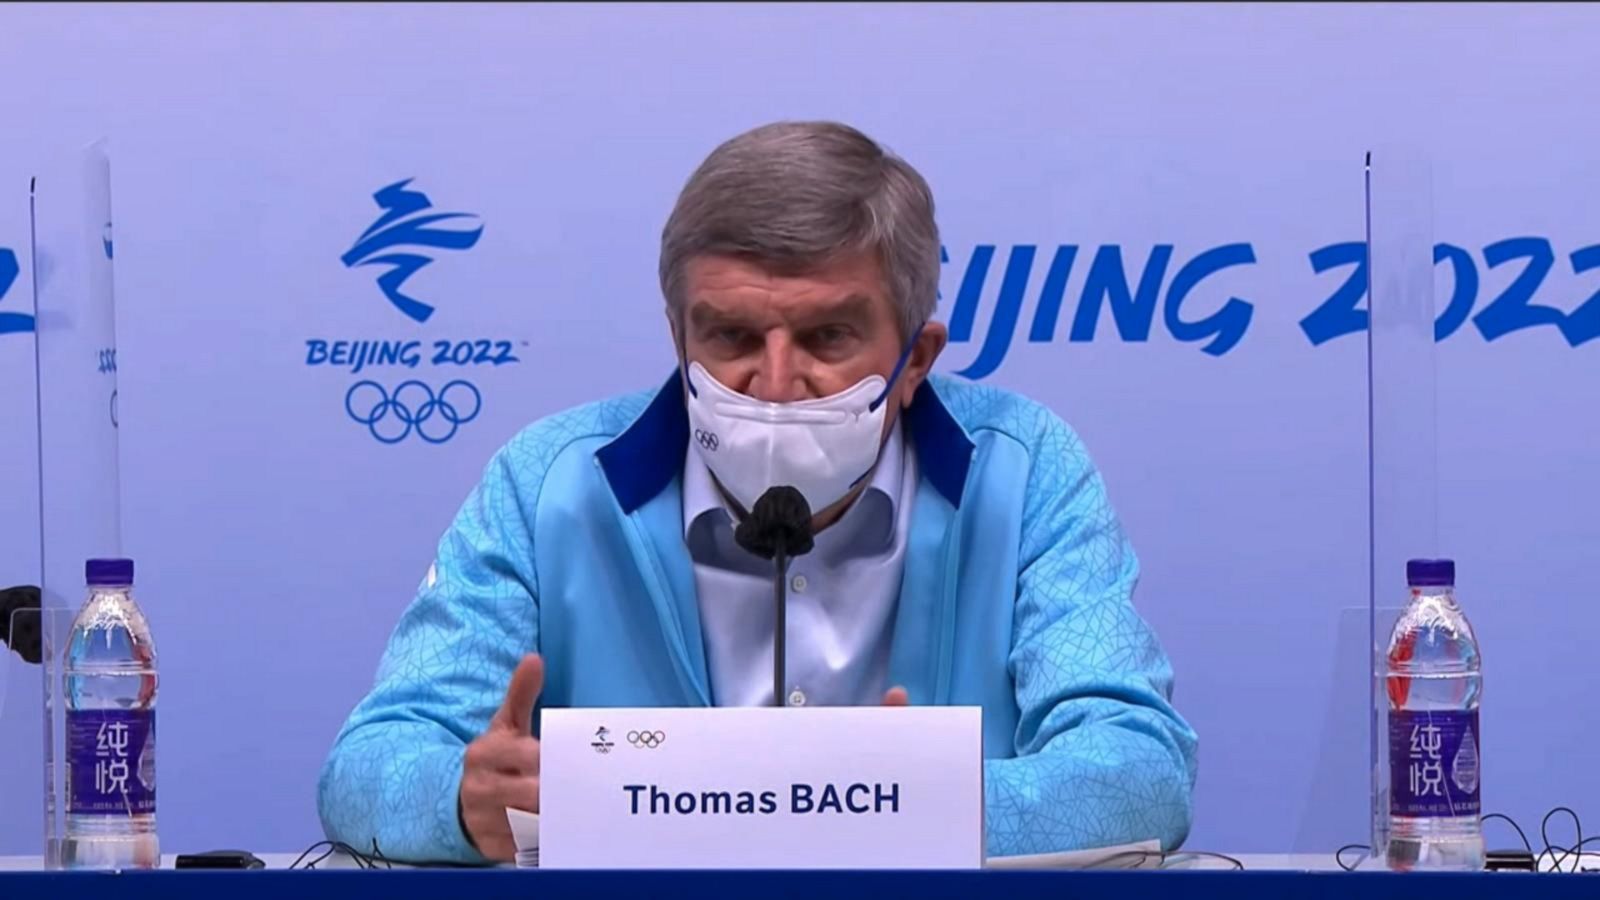 VIDEO: IOC president speaks out about Russian doping scandal